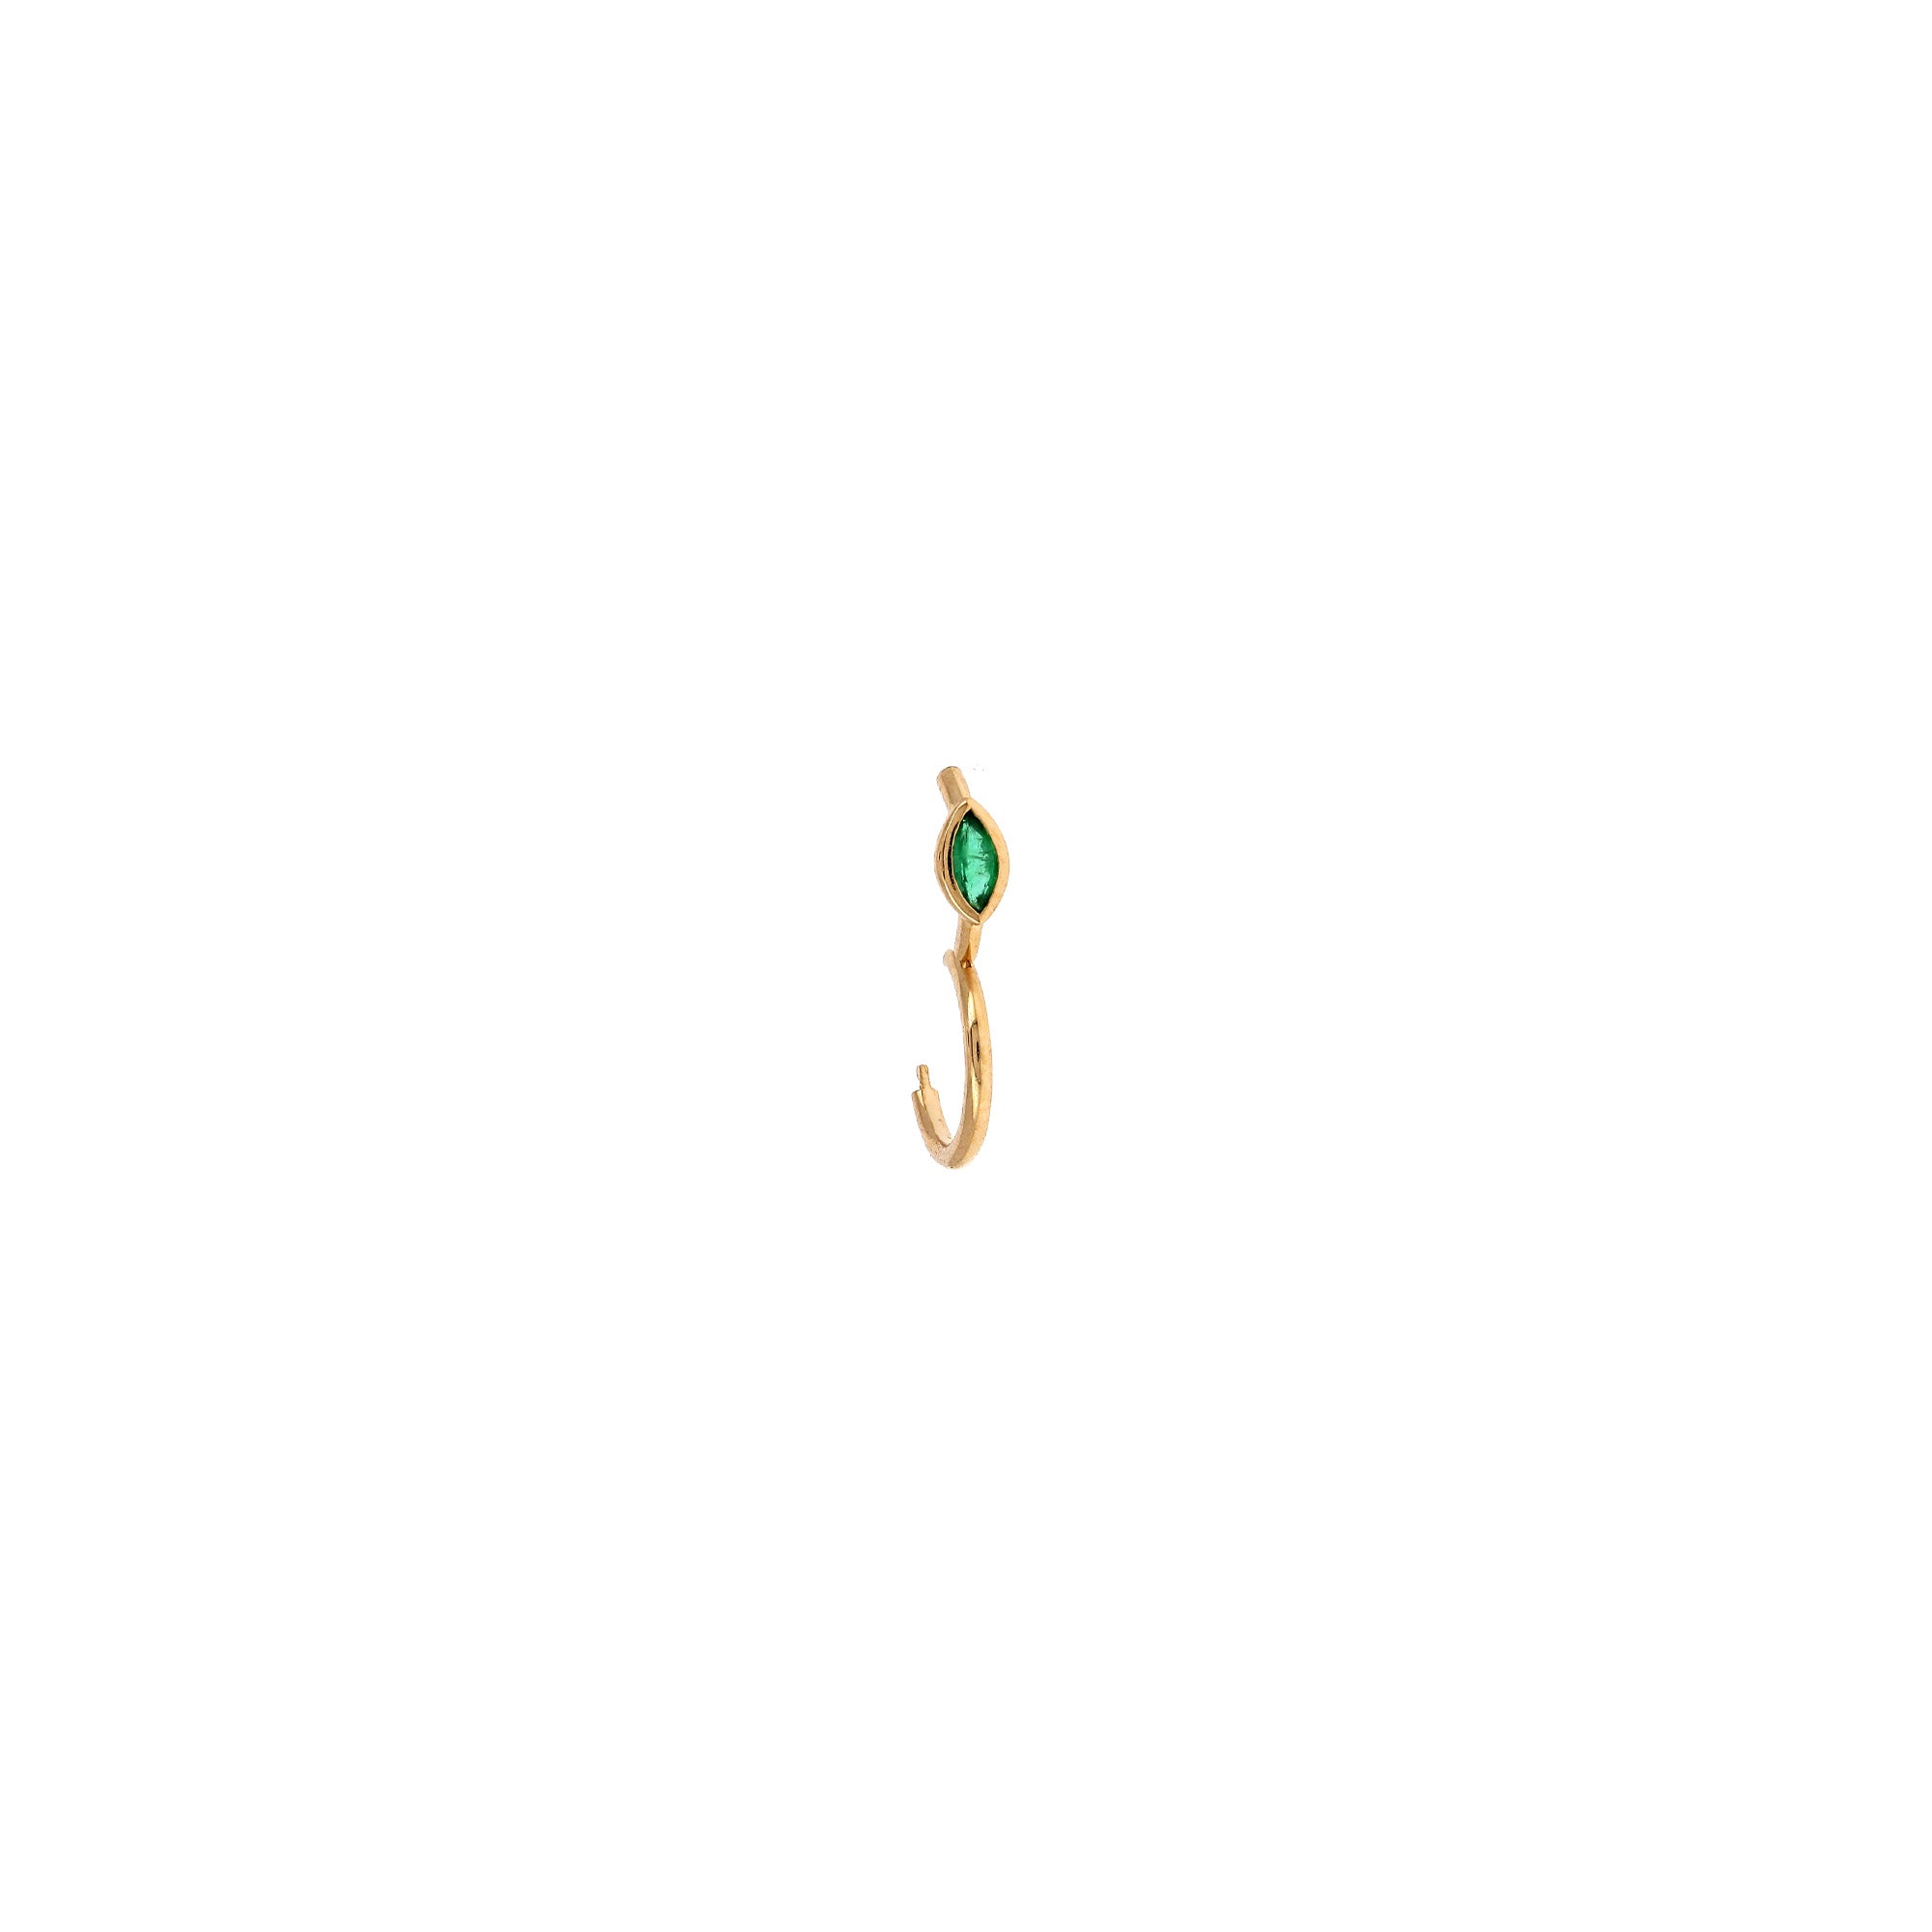 6.5mm Marquise Emerald 3x2mm Rose Gold Hoop